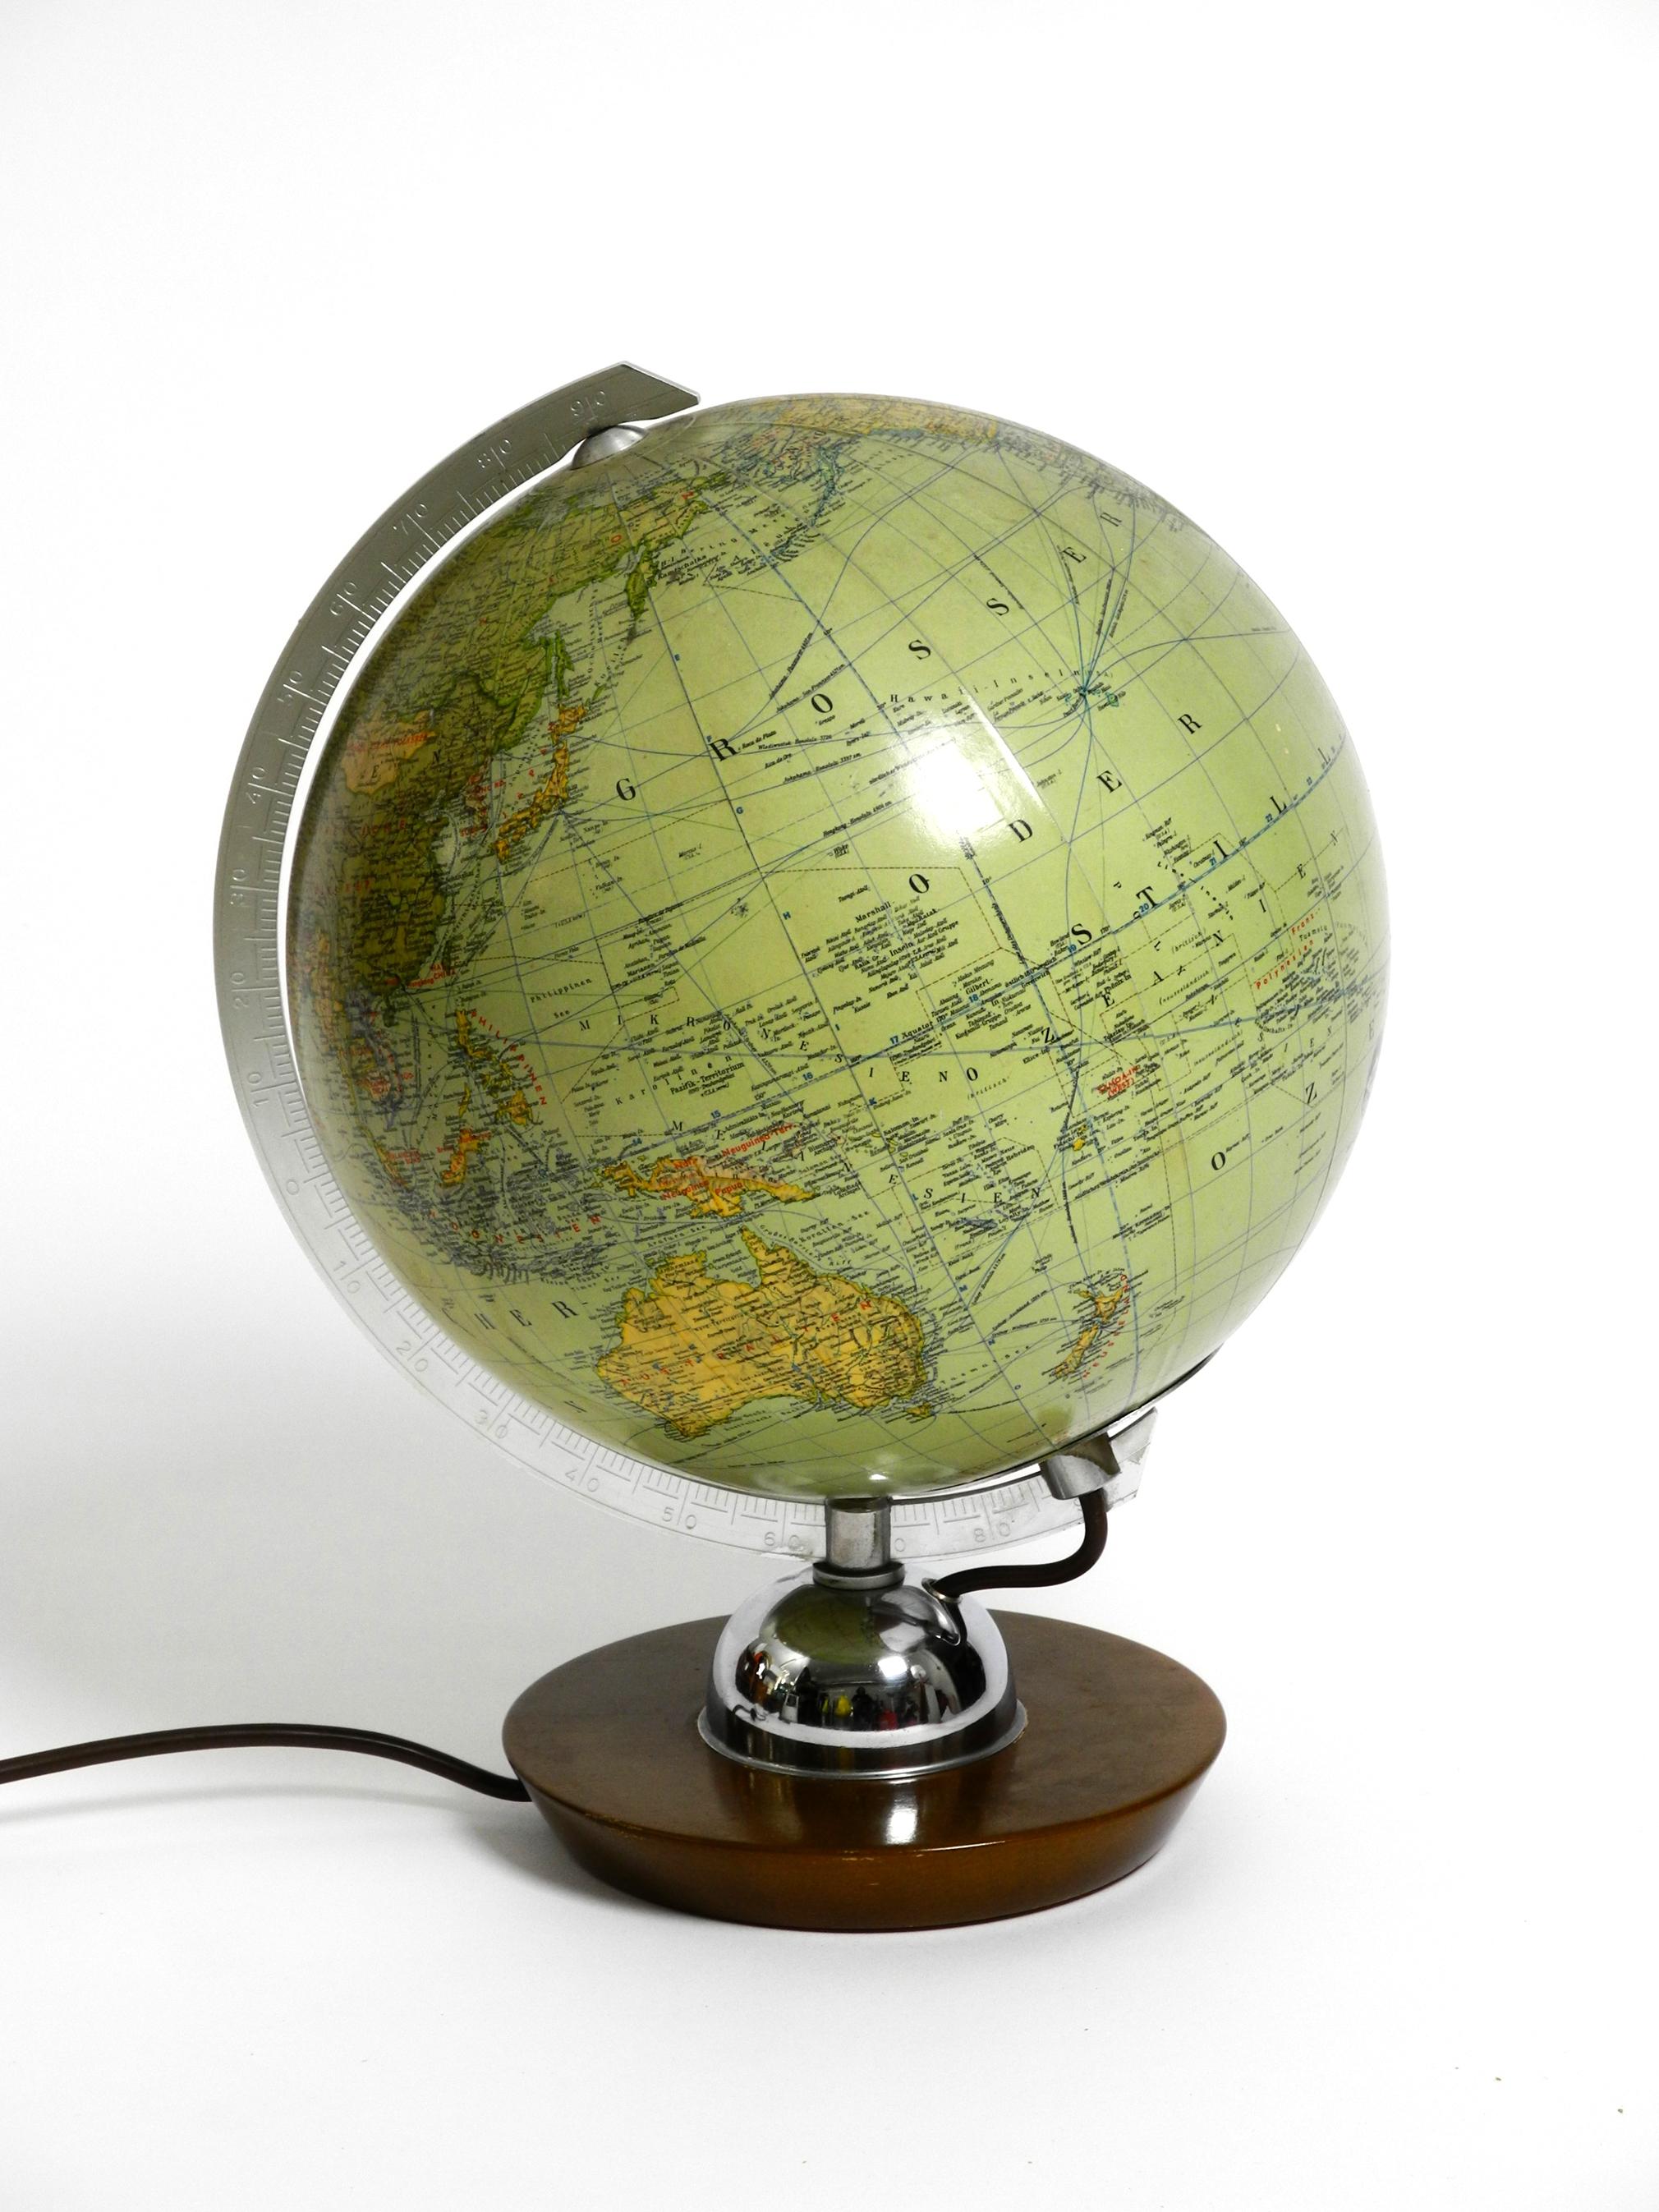 Beautiful Mid Century glass light globe from the 60s by JRO Globus.
Manufacturer is JRO-Verlag Munich. Very detailed descriptions and information.
Made in Germany.
Walnut wood base. Aluminum rim.
The globe is in very good condition. Scale